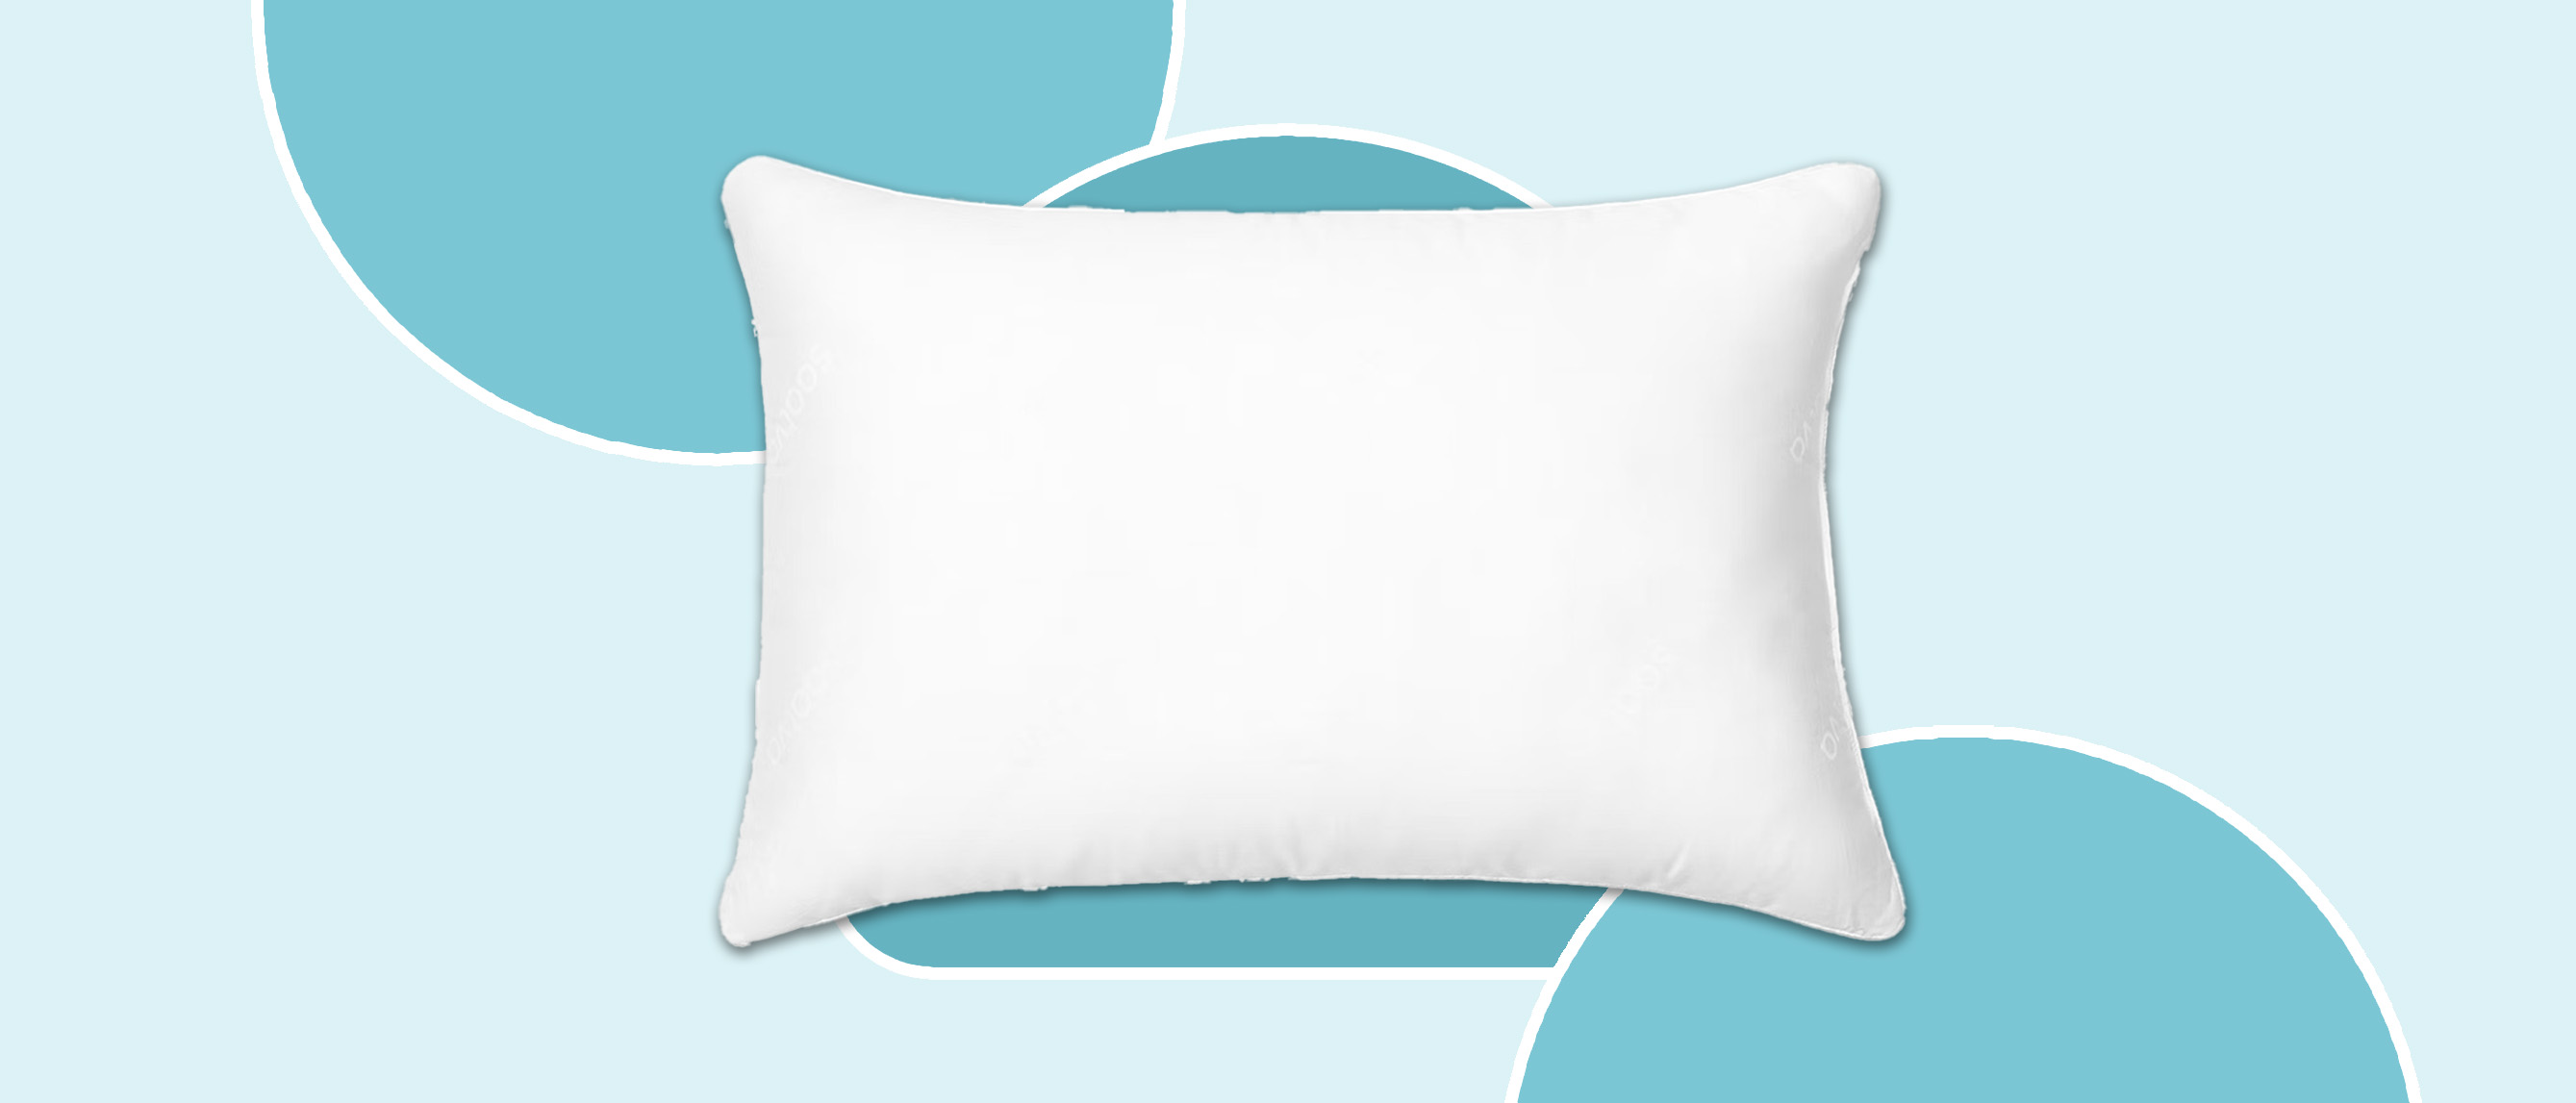 a large white down pillow from Saatva